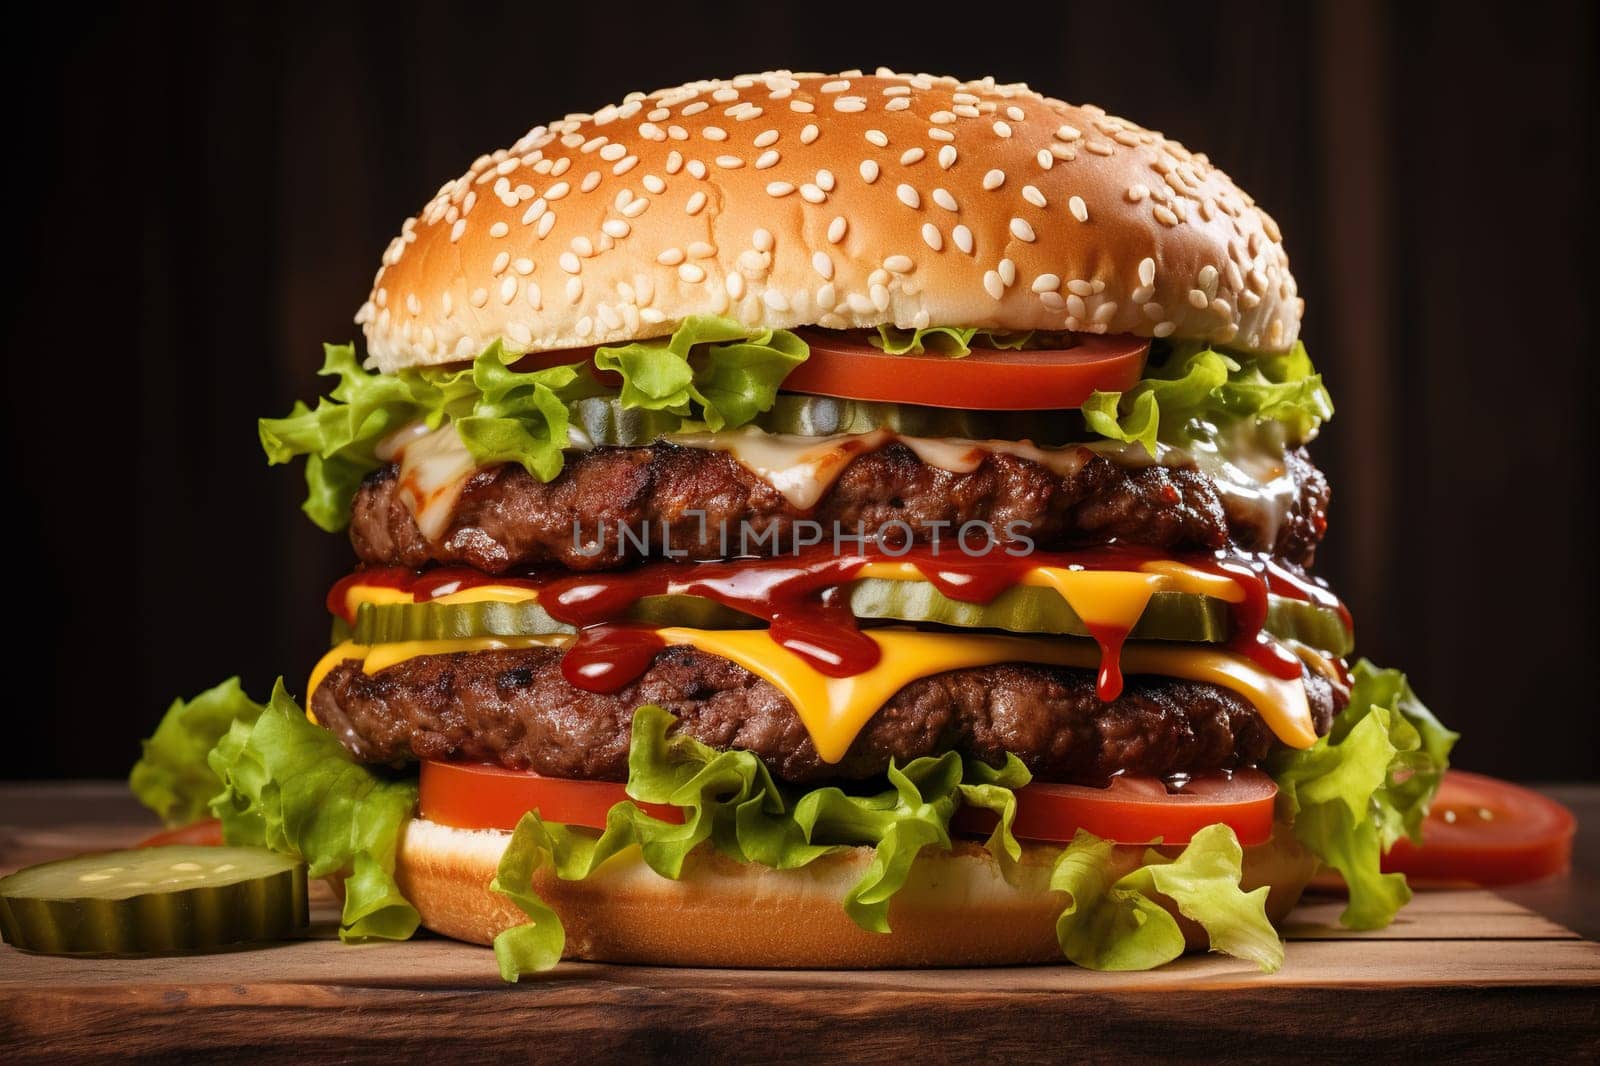 Juicy appetizing burger on a wooden tabletop close-up.